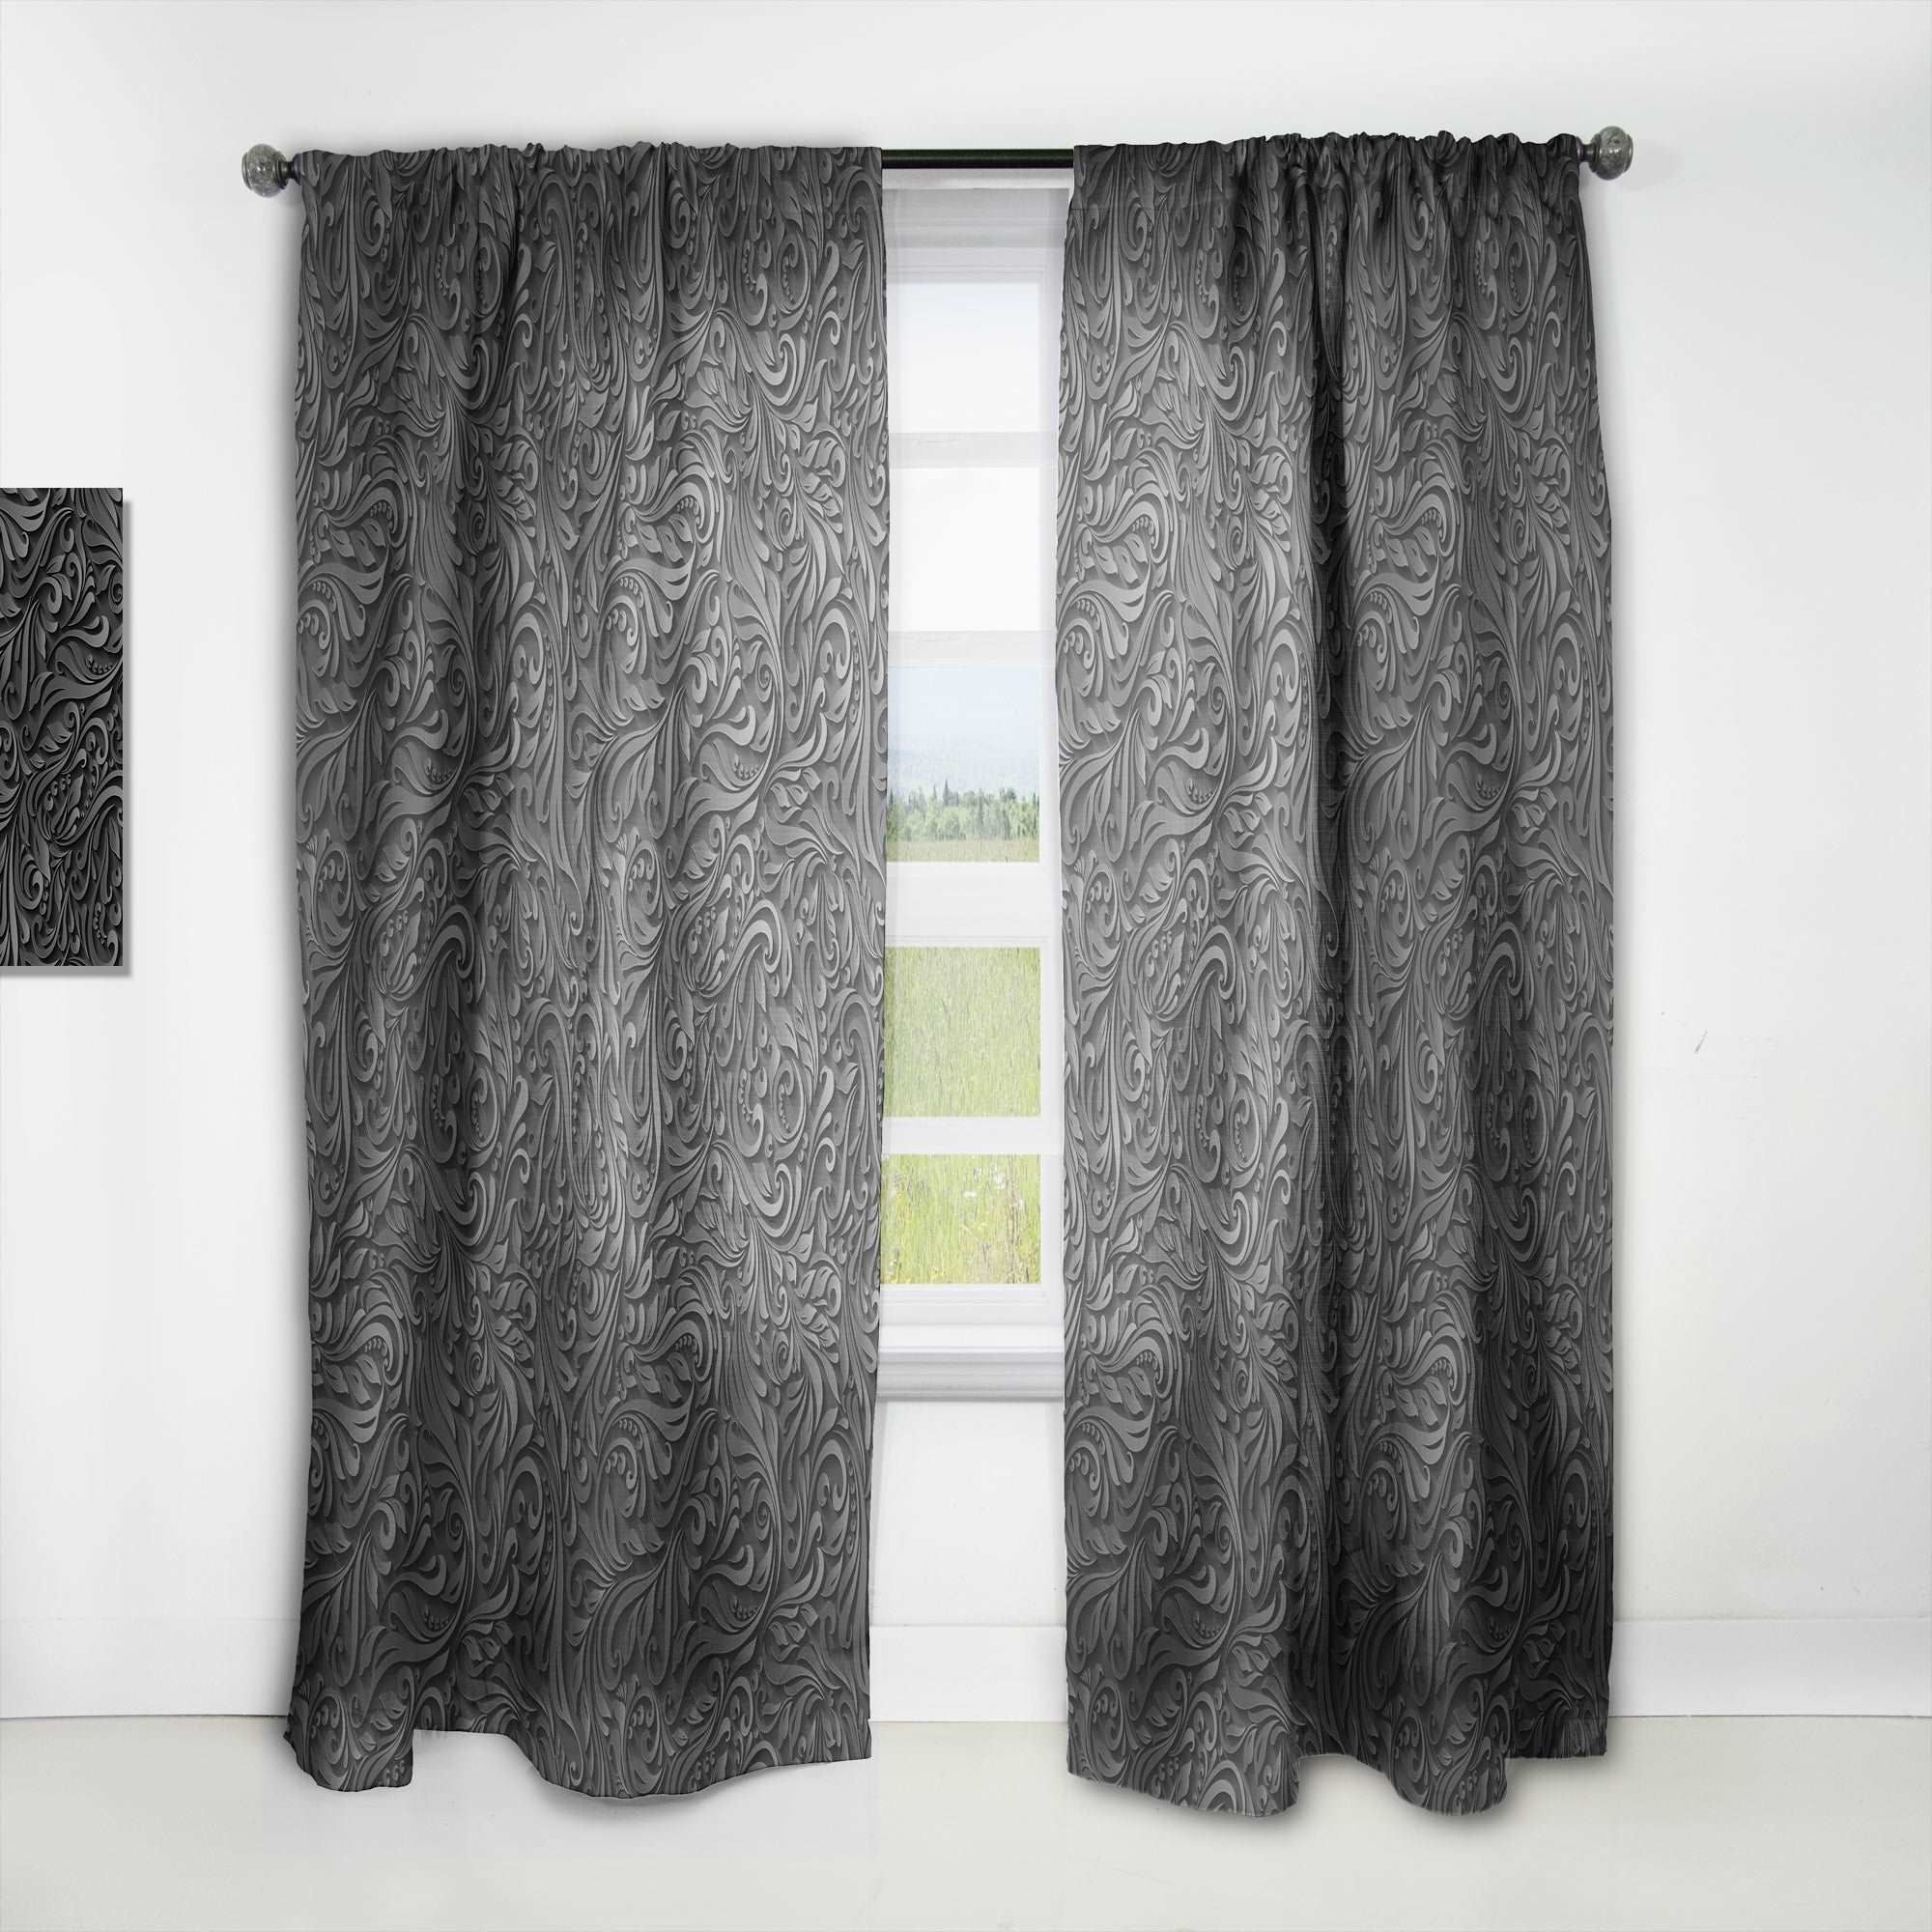 3D leaves in Shades of Black' Modern & Contemporary Curtain Panel Sheer